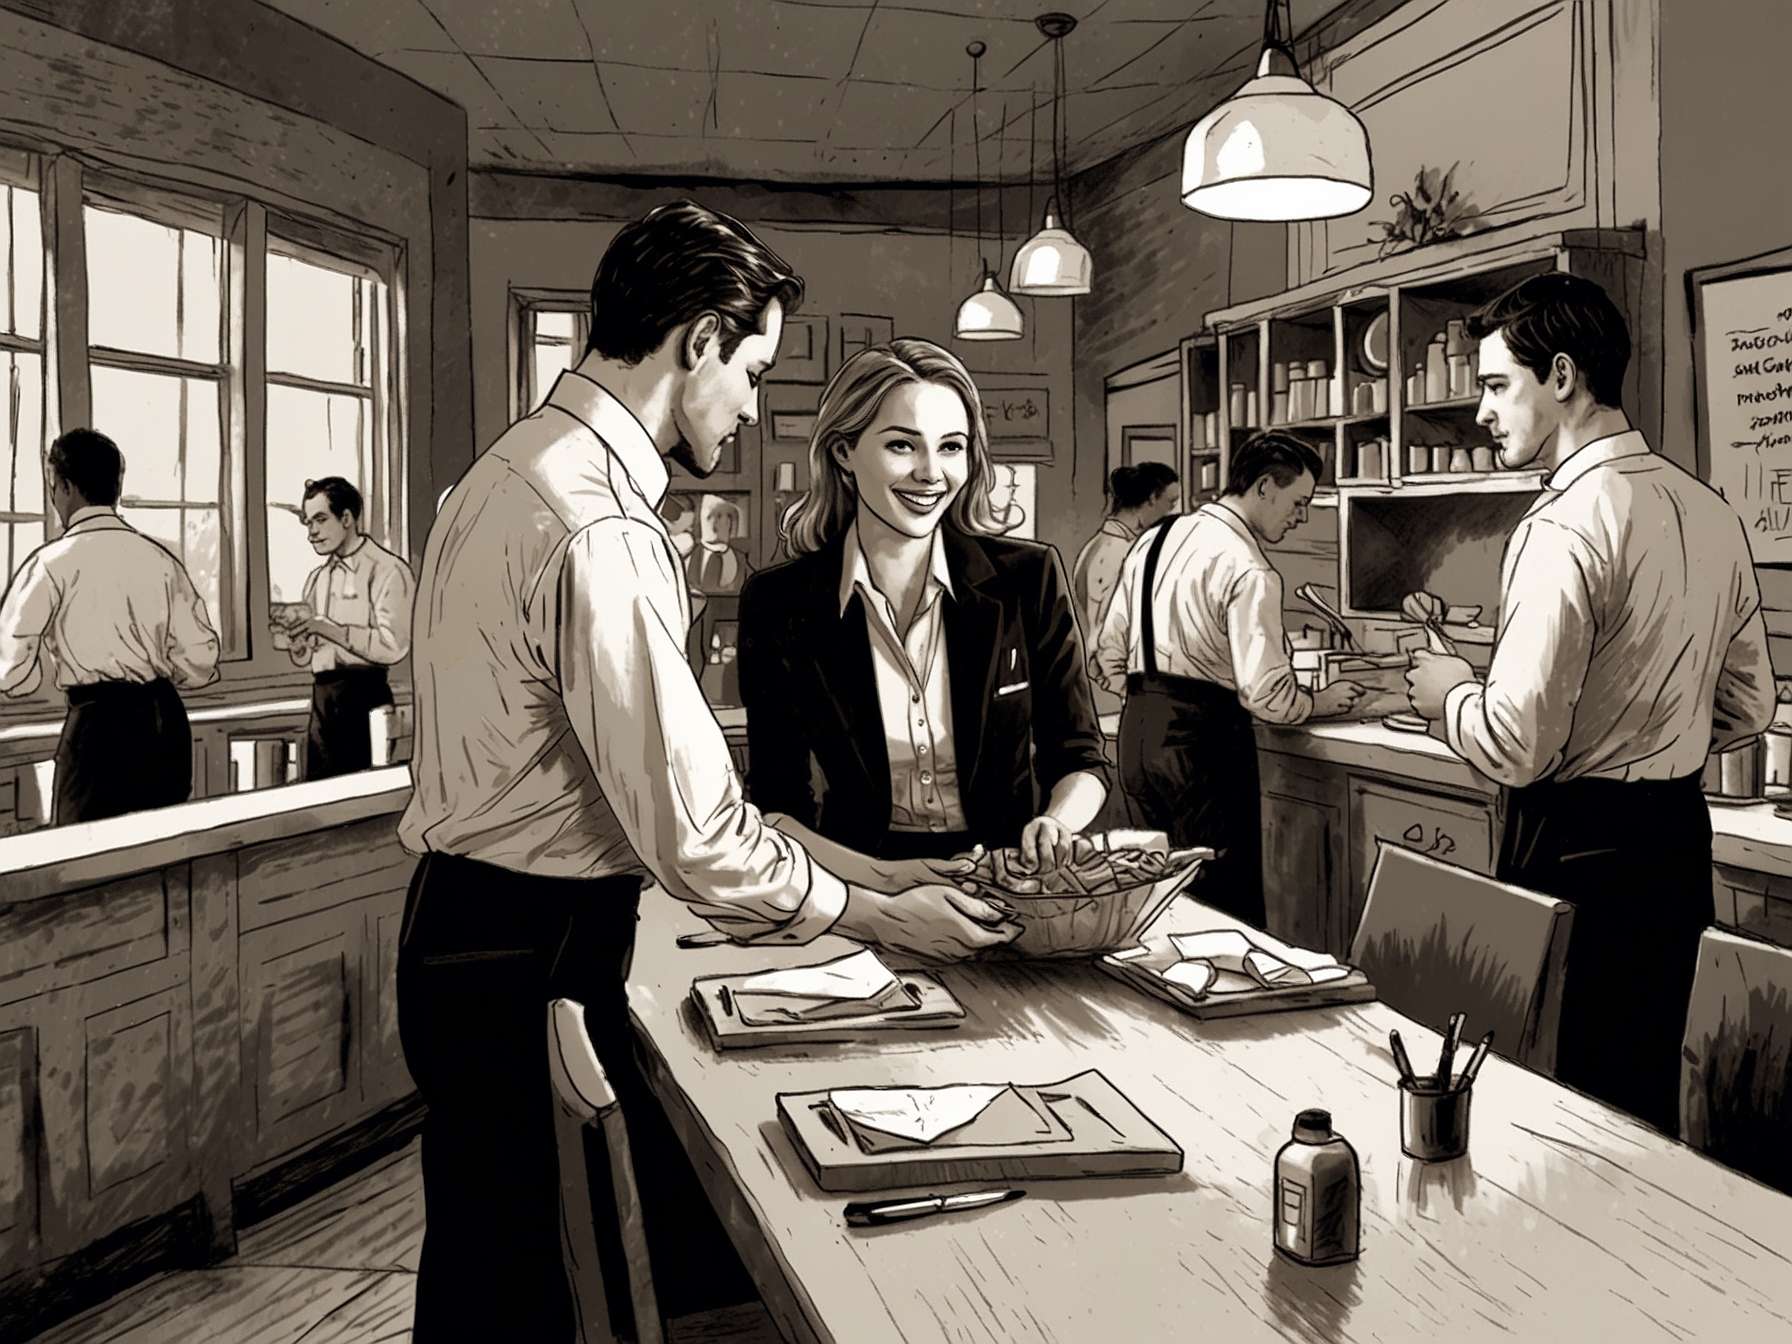 Waitstaff members collecting tips at a busy restaurant, representing the hospitality industry's stake in the tax debate.